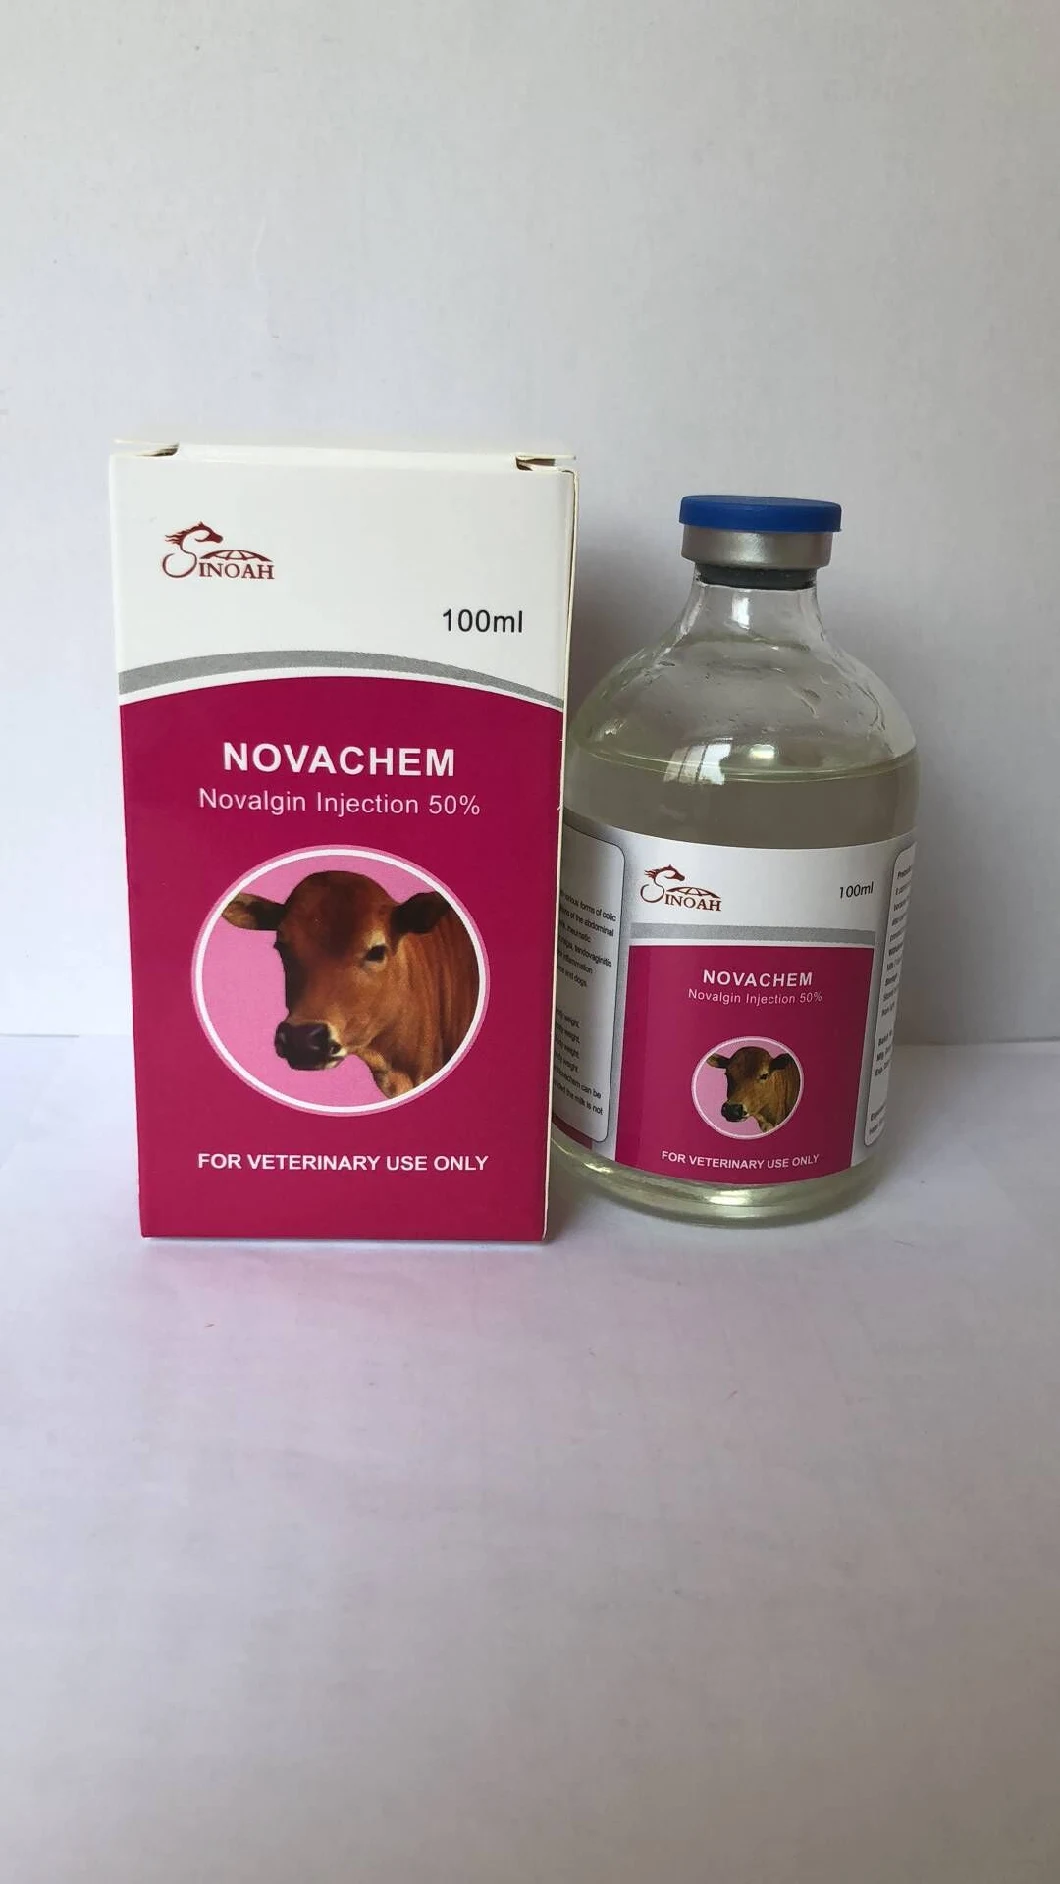 Metamizole Sodium Injection 30% for Veterinary Use Only